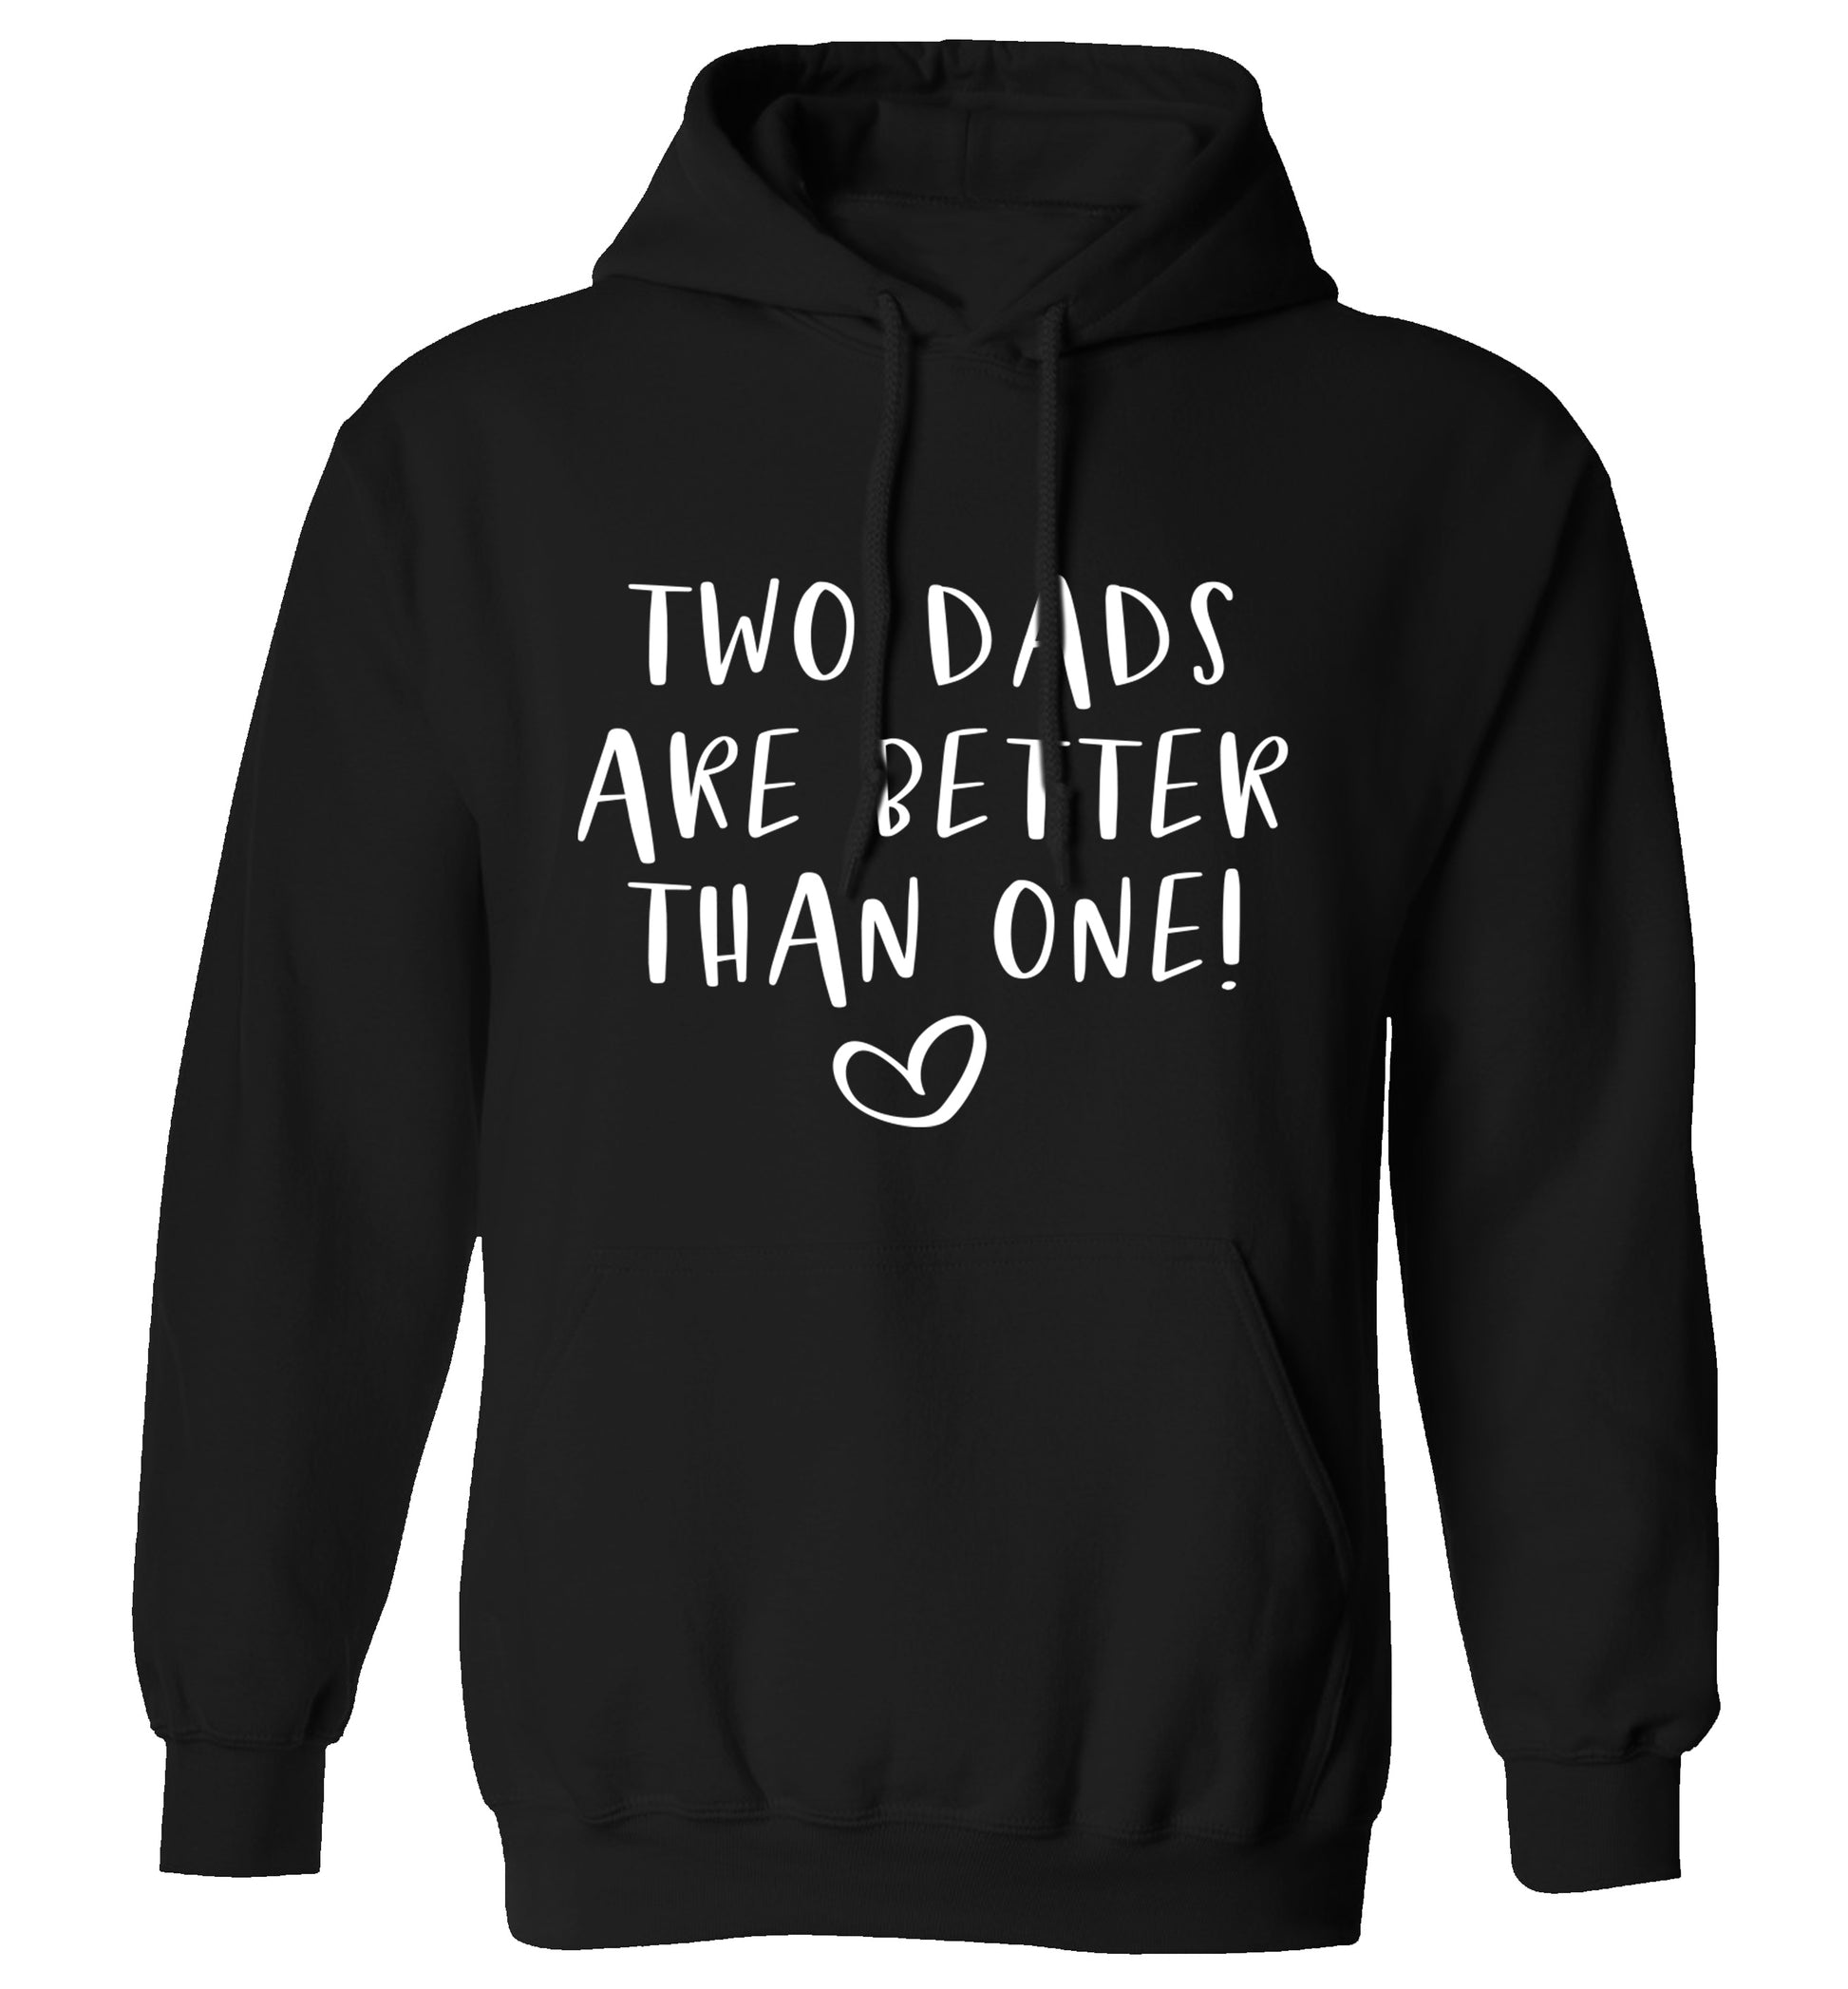 Two dads are better than one adults unisex black hoodie 2XL